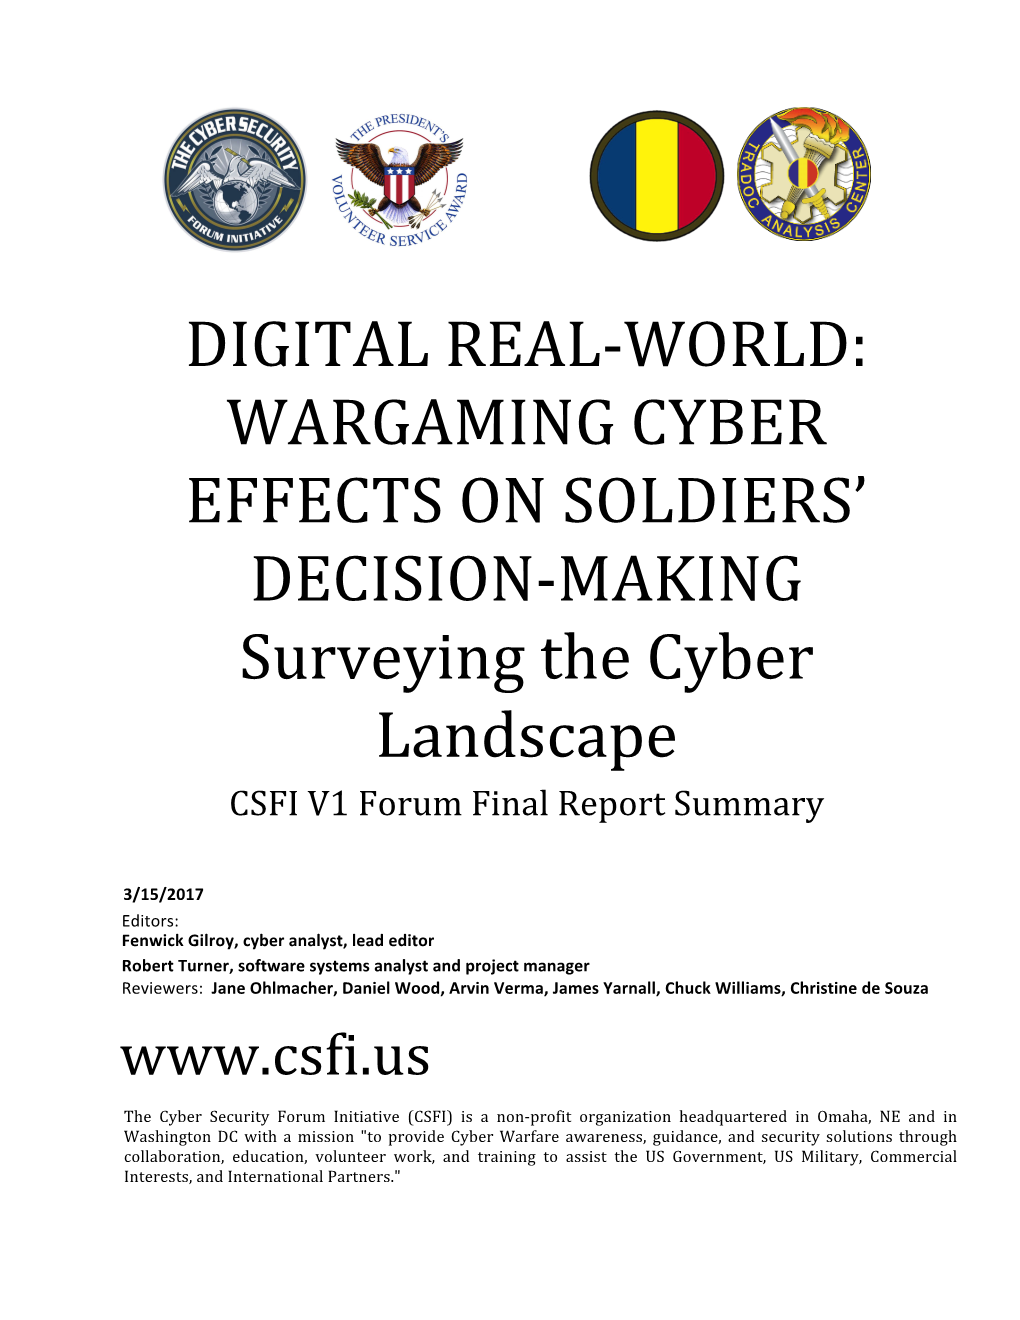 DIGITAL REAL-WORLD: WARGAMING CYBER EFFECTS on SOLDIERS’ DECISION-MAKING Surveying the Cyber Landscape CSFI V1 Forum Final Report Summary